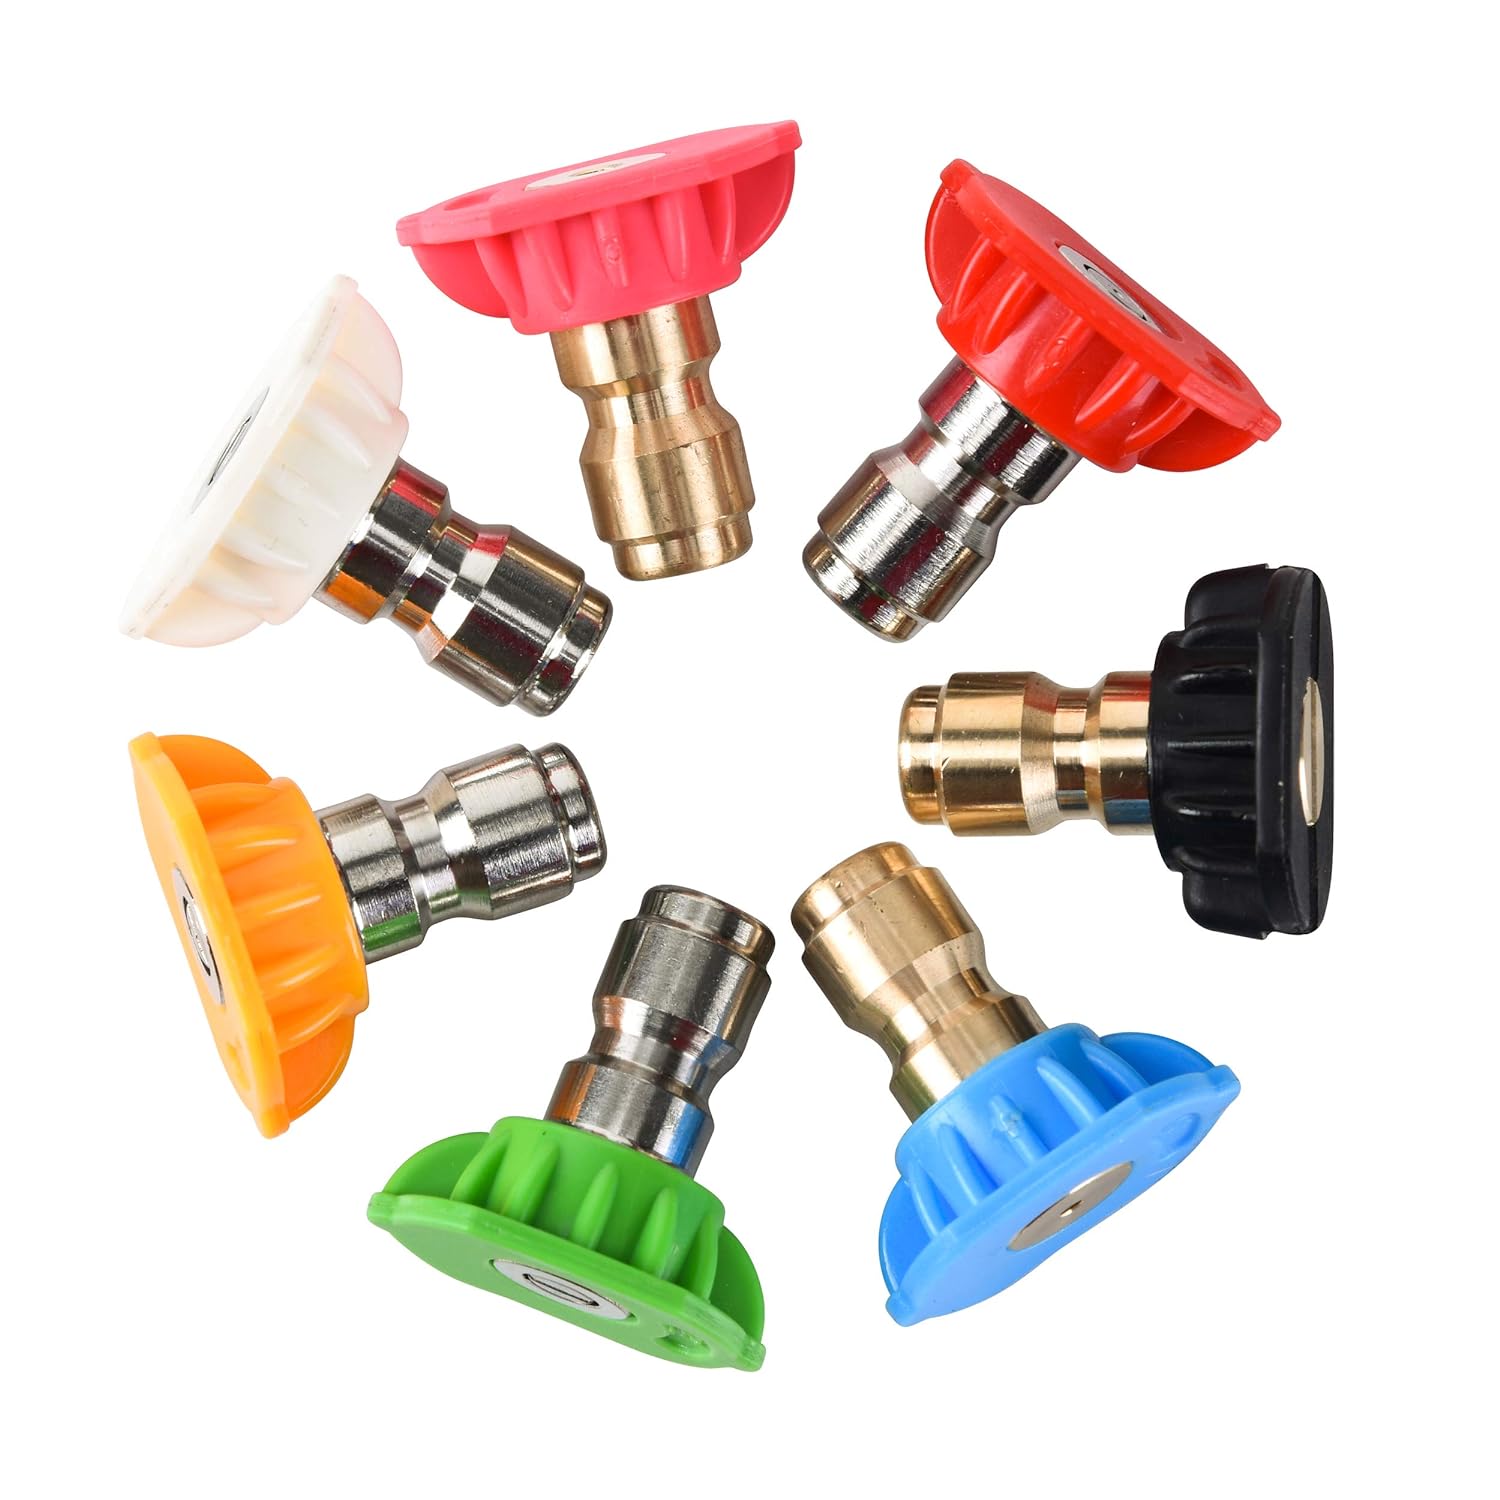 GCP Products Pressure Washer Tips Set With Nozzle Holder, 7 Nozzle Tips, 1/4 Inch Quick Connect, 4000 Psi